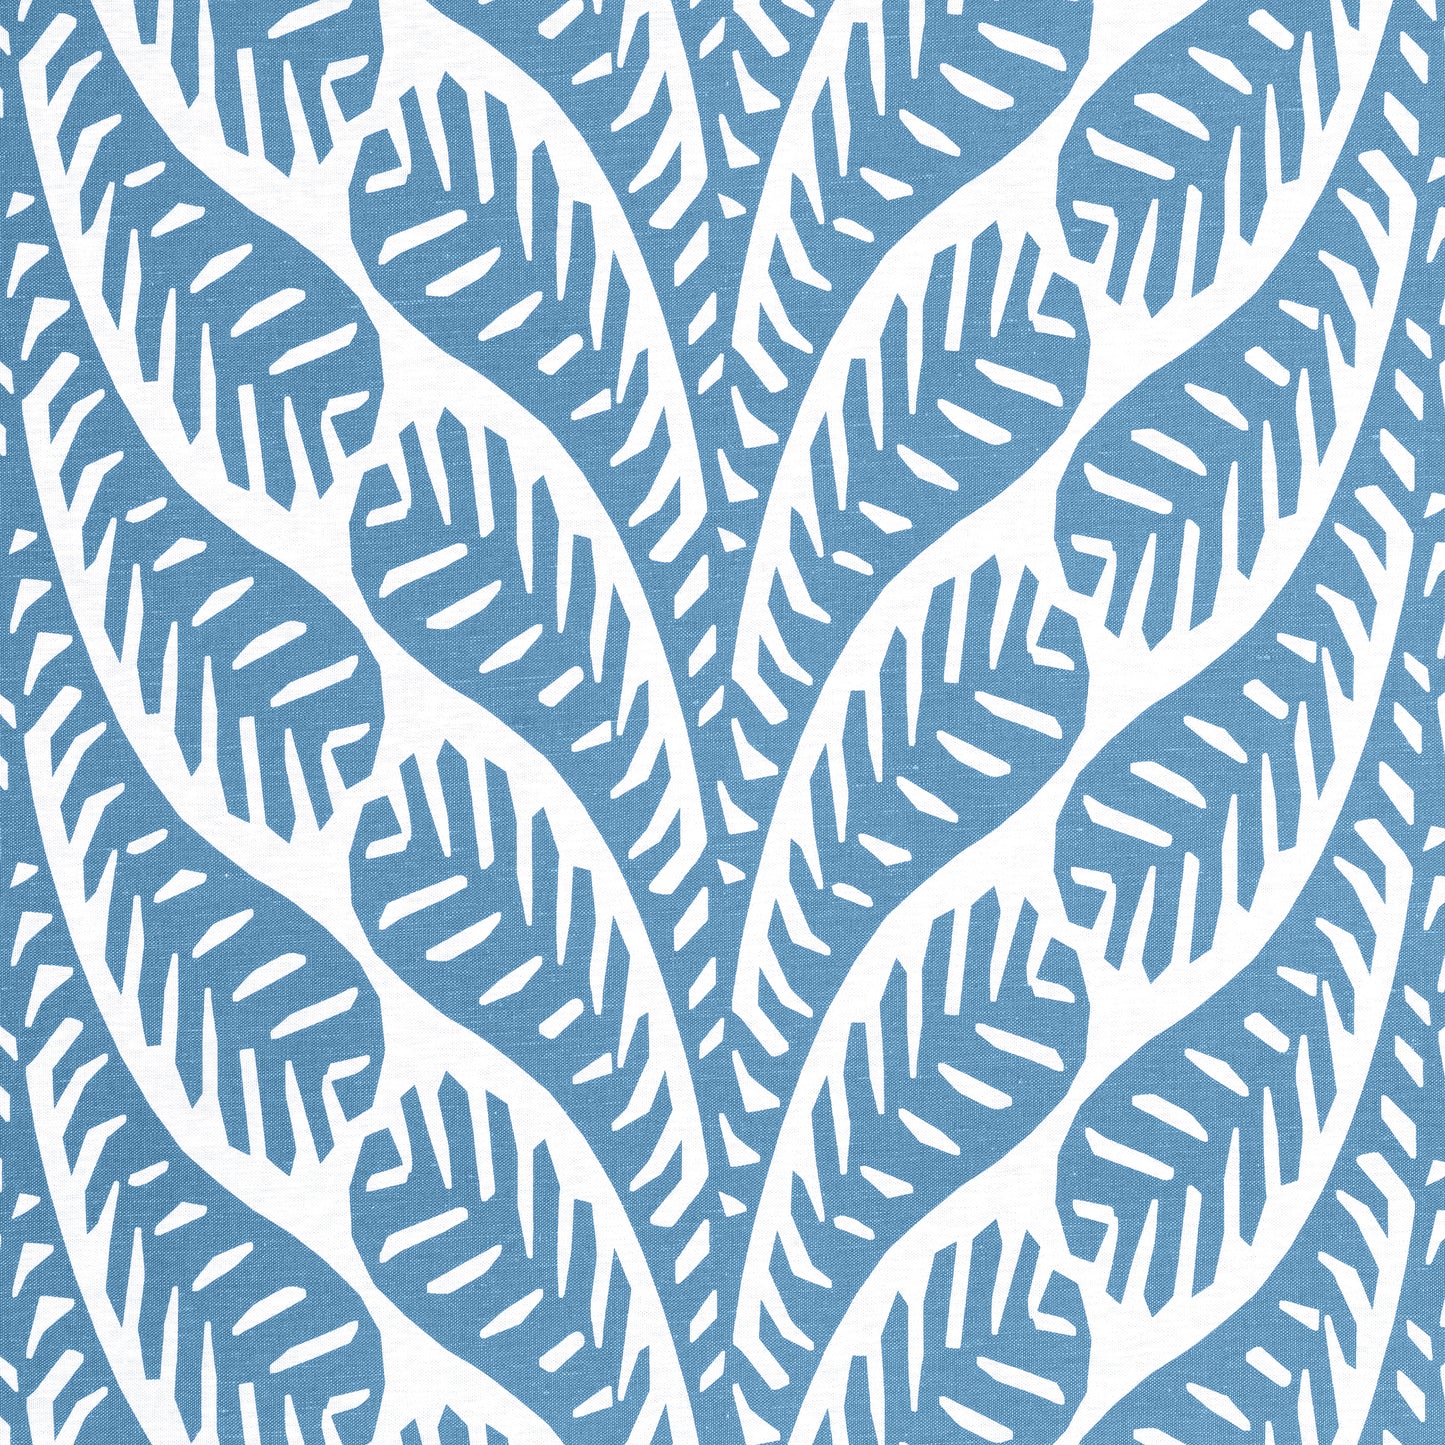 Purchase Thibaut Fabric Pattern number F920848 pattern name Ginger color Blue